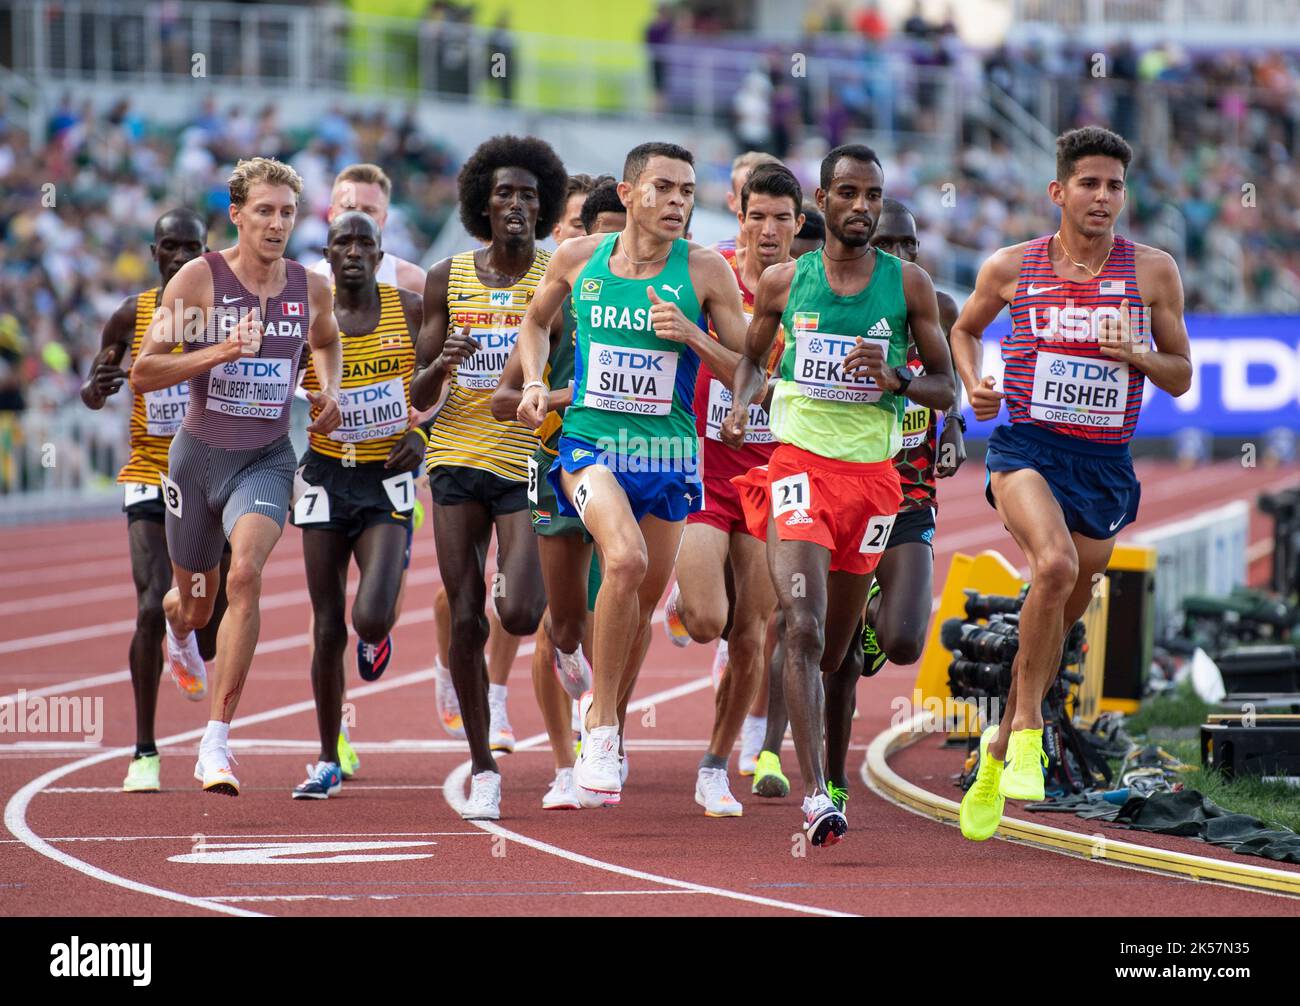 Grant Fisher of the USA competing in the men’s 5000m heats at the World Athletics Championships, Hayward Field, Eugene, Oregon USA on the 21st July 20 Stock Photo